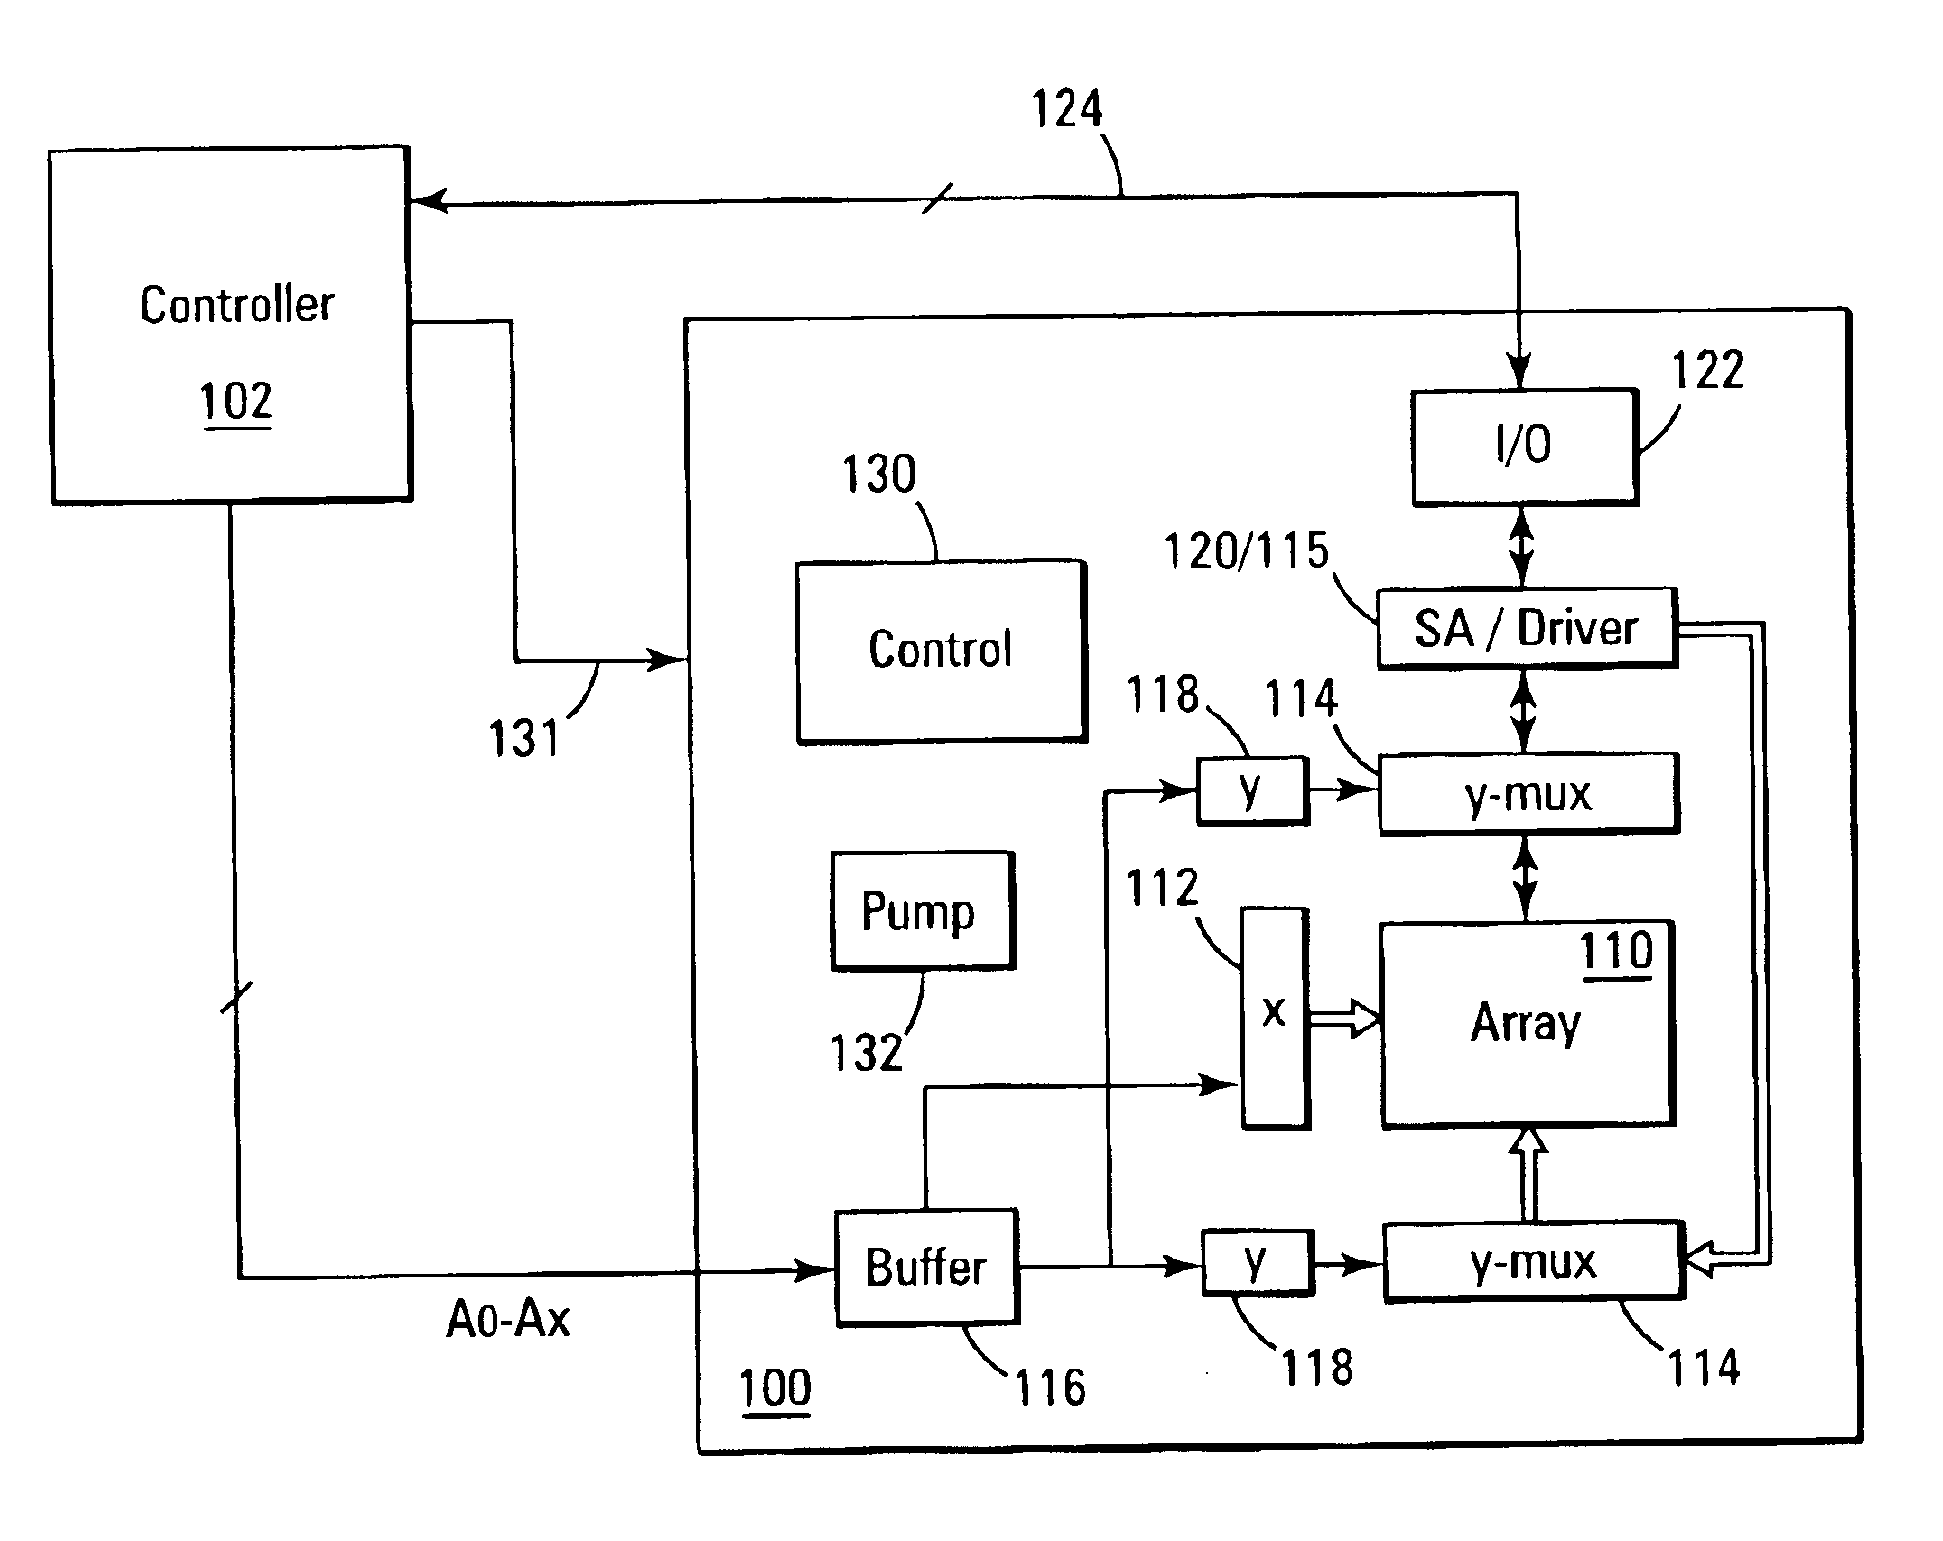 Non-volatile memory with test rows for disturb detection